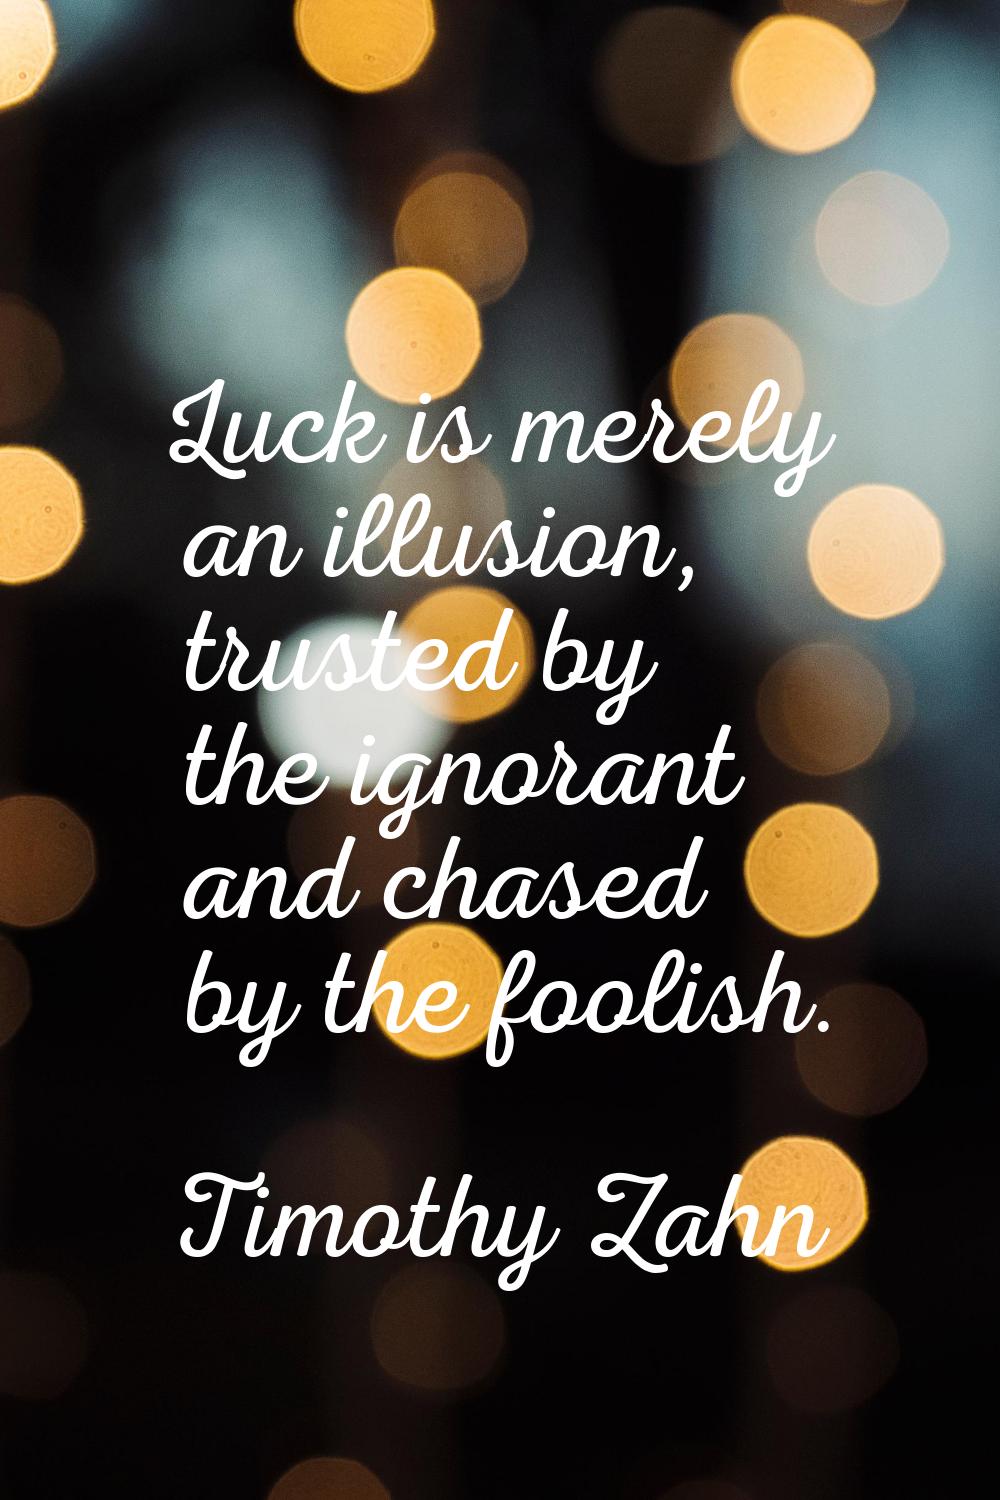 Luck is merely an illusion, trusted by the ignorant and chased by the foolish.